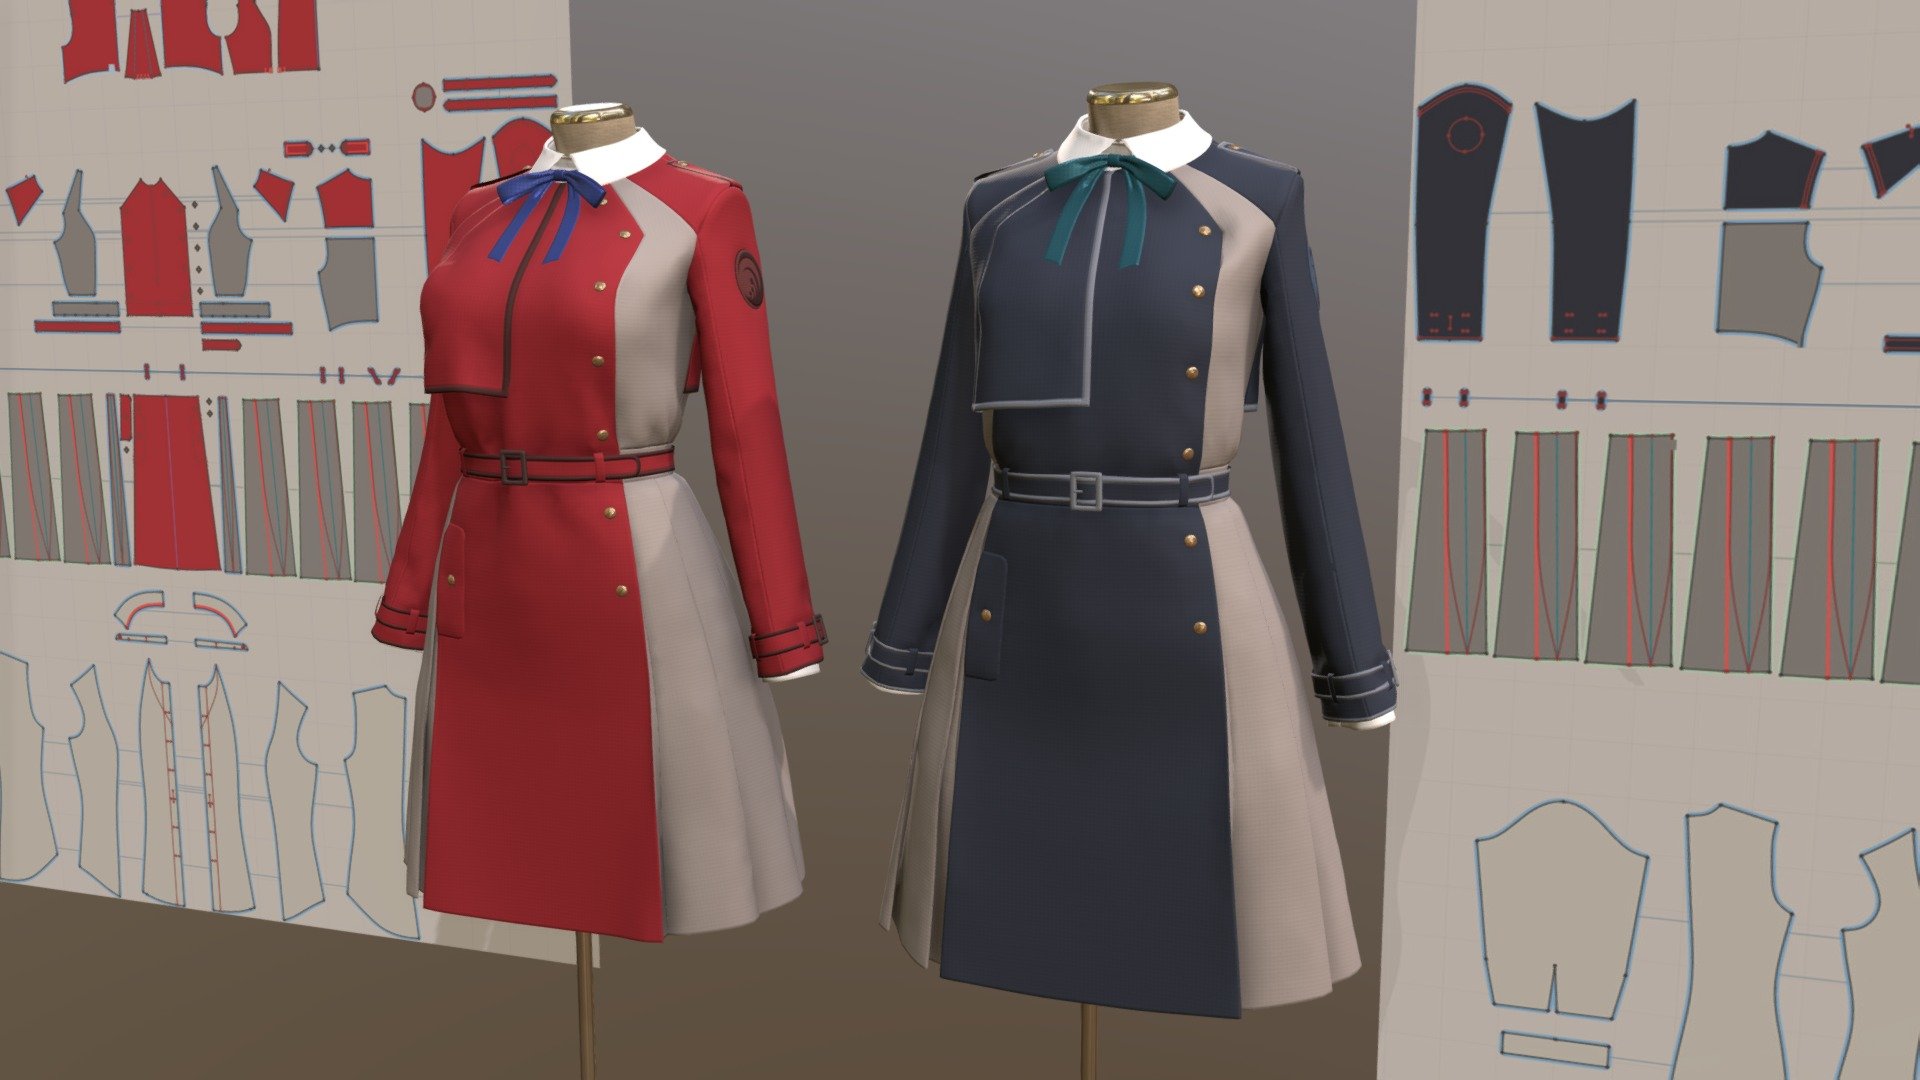 Made in Marvelous Designer. 

Based on design by anime Lycoris Recoil 

and official costumes for material references.

- Lycoris Agent 1st Uniform (Red)

- Lycoris Agent 2nd Uniform (Navy)

I'll set to Downloadable If this model reach 100 Likes. Included Marvelous Designer files

[19:26 2022-10-20]
Now that the number of likes on sketchfab has reached 100, So I'm sharing the project file as I said.

Check out  my twitter - Lycoris Uniform Digital Tailoring FanArt - Download Free 3D model by johnniewhiskey 3d model